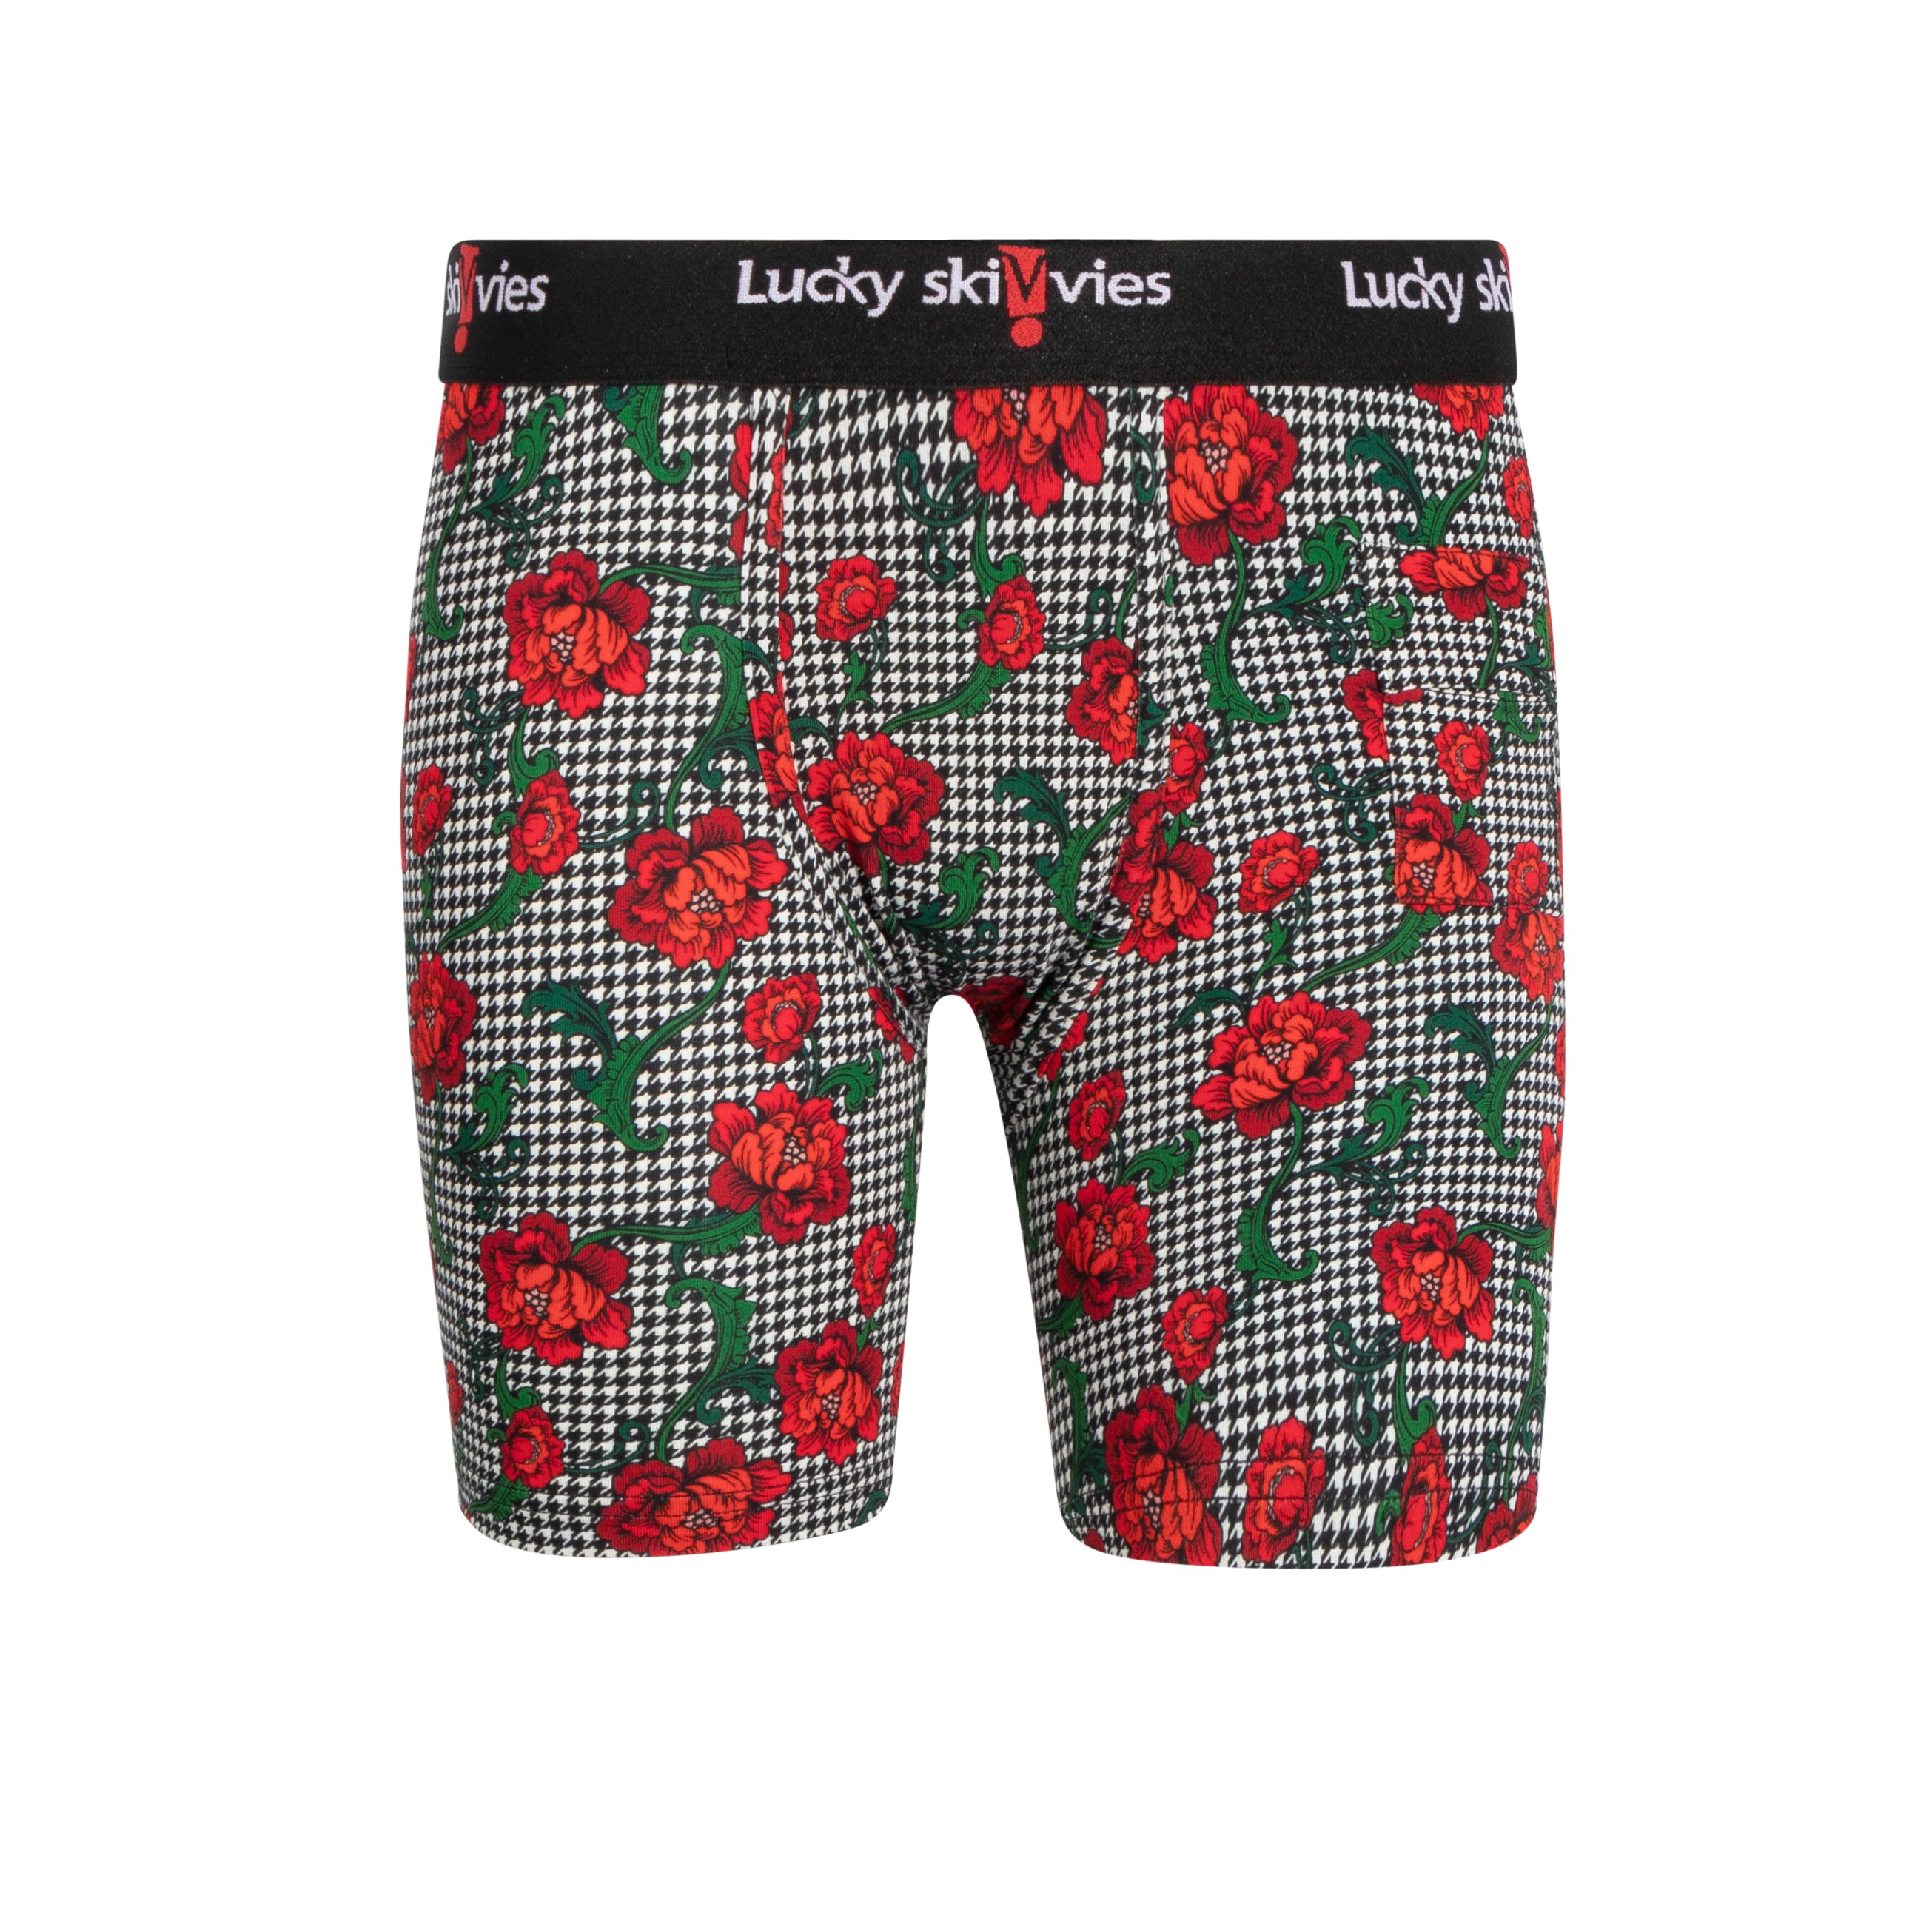 Roses in Harlem (Houndstooth) - Lucky Skivvies